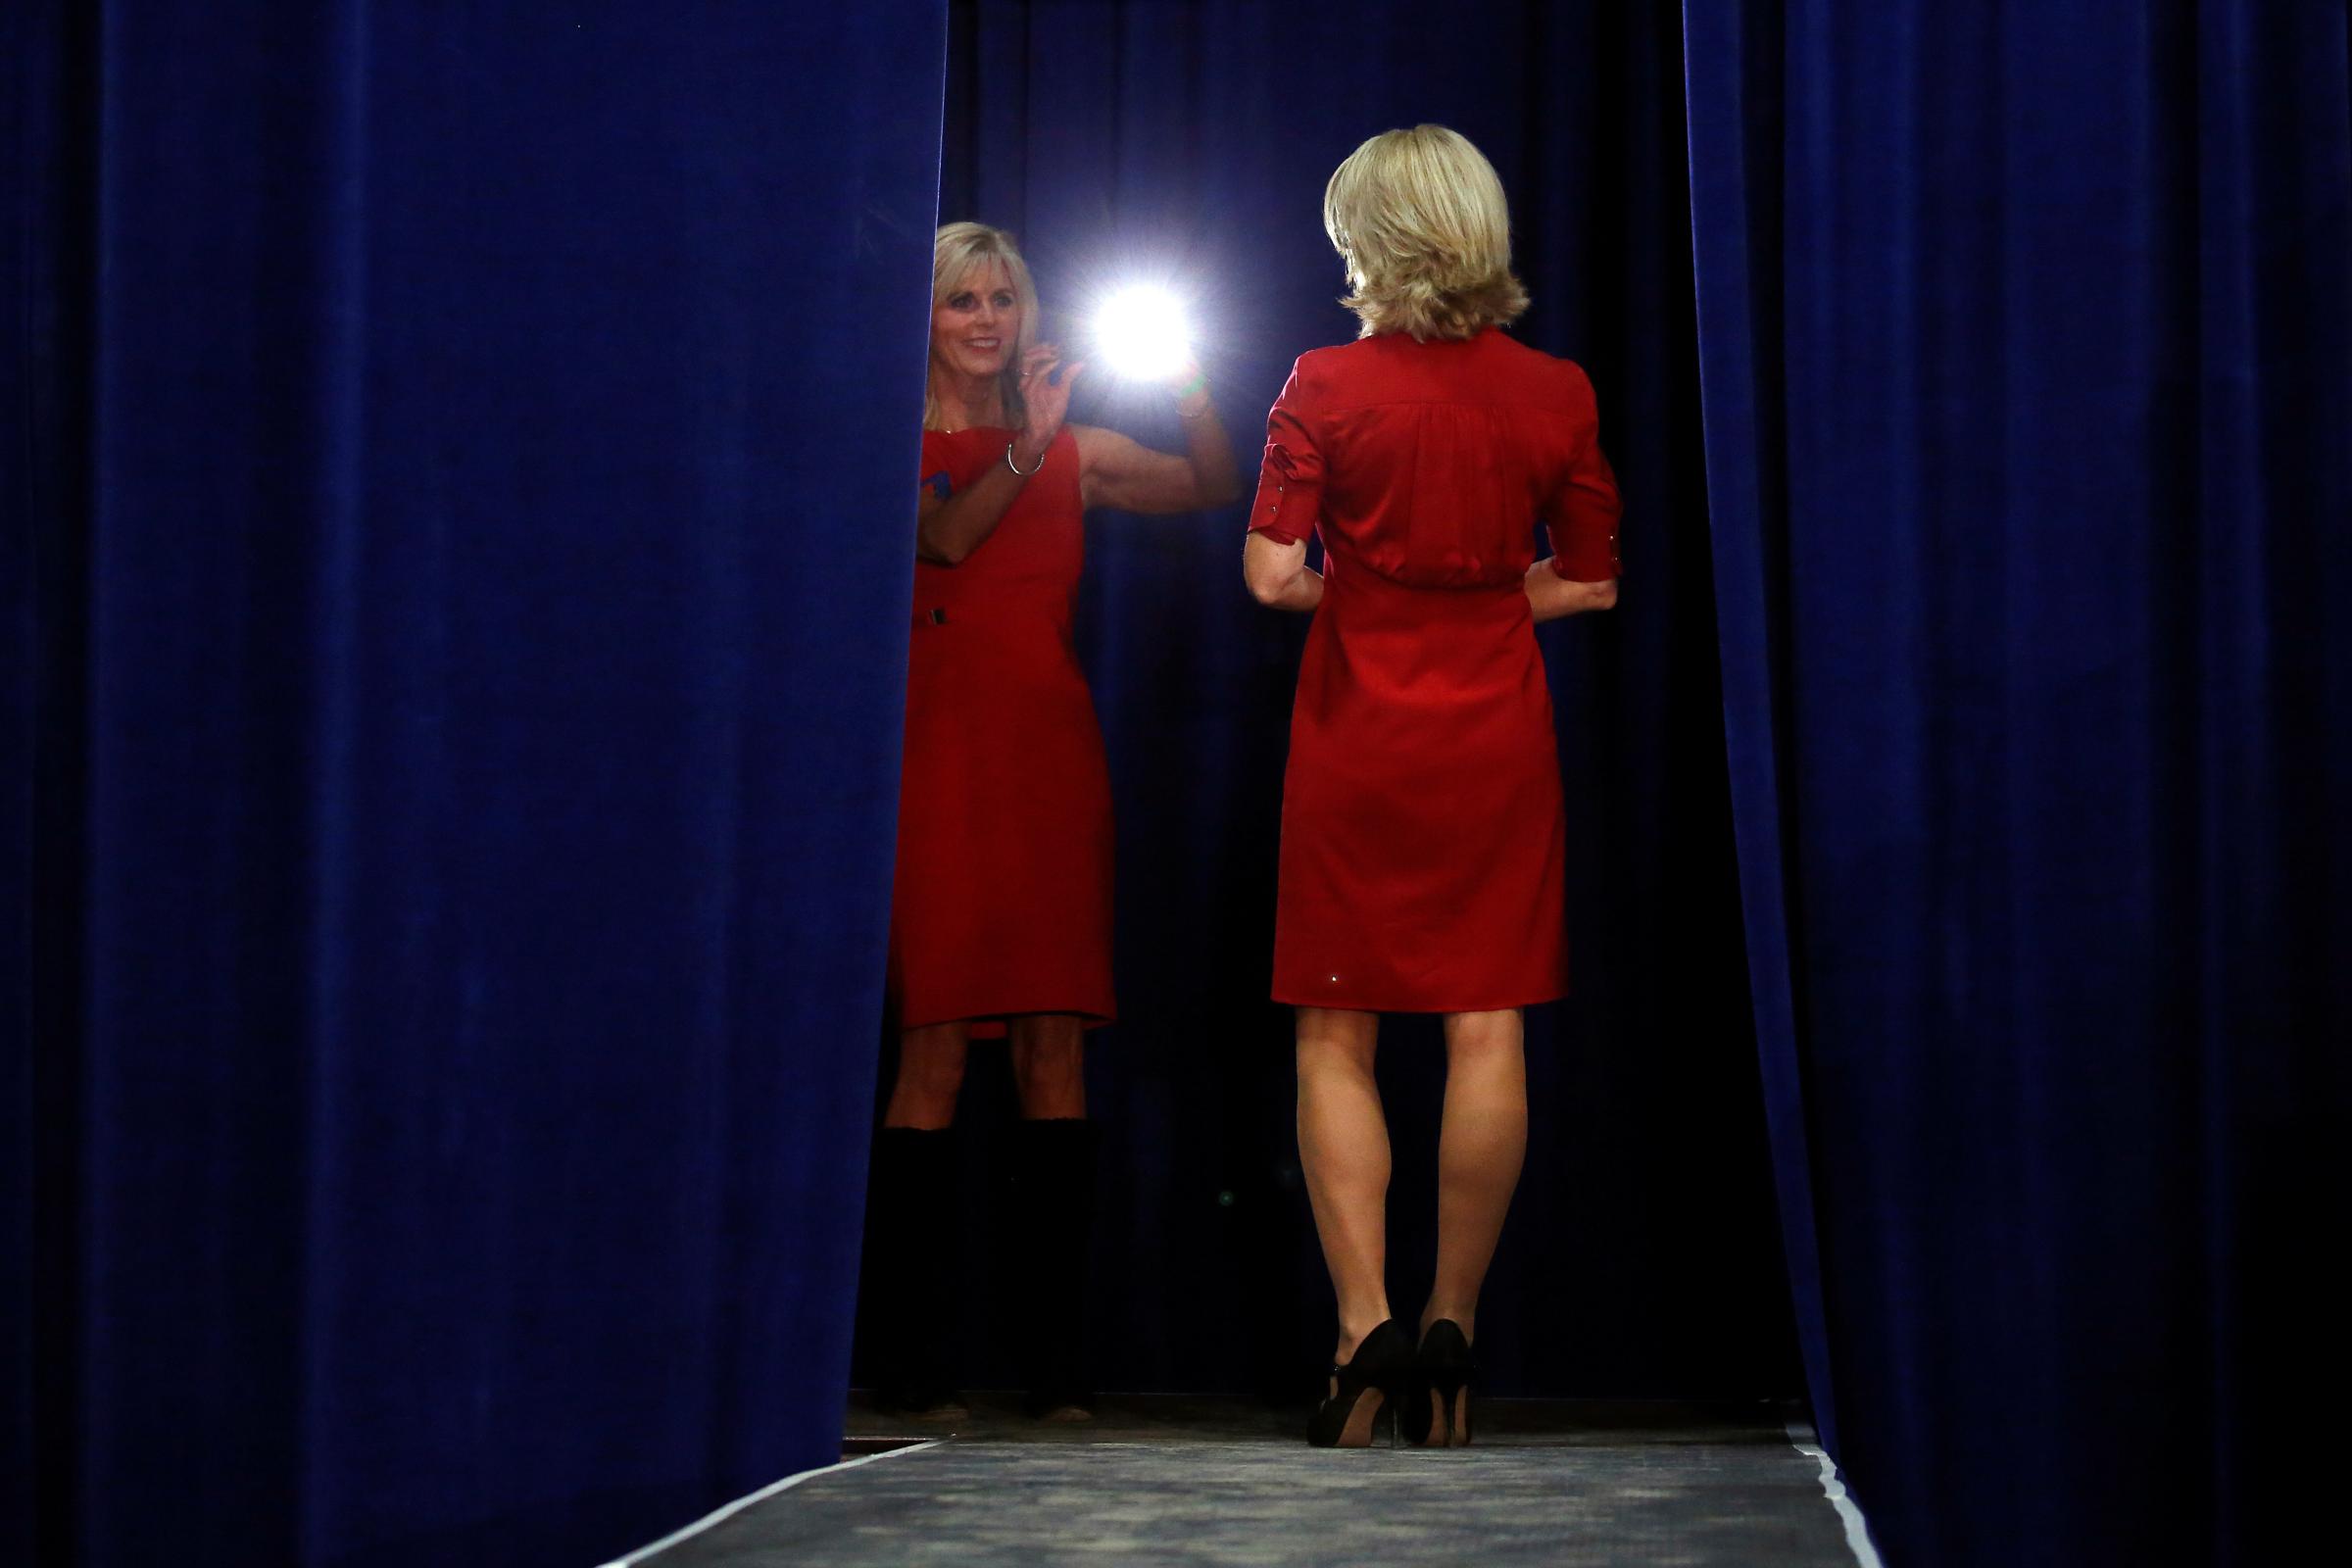 Two women take pictures on stage before Republican presidential nominee Donald Trump attends a campaign event in Springfield,